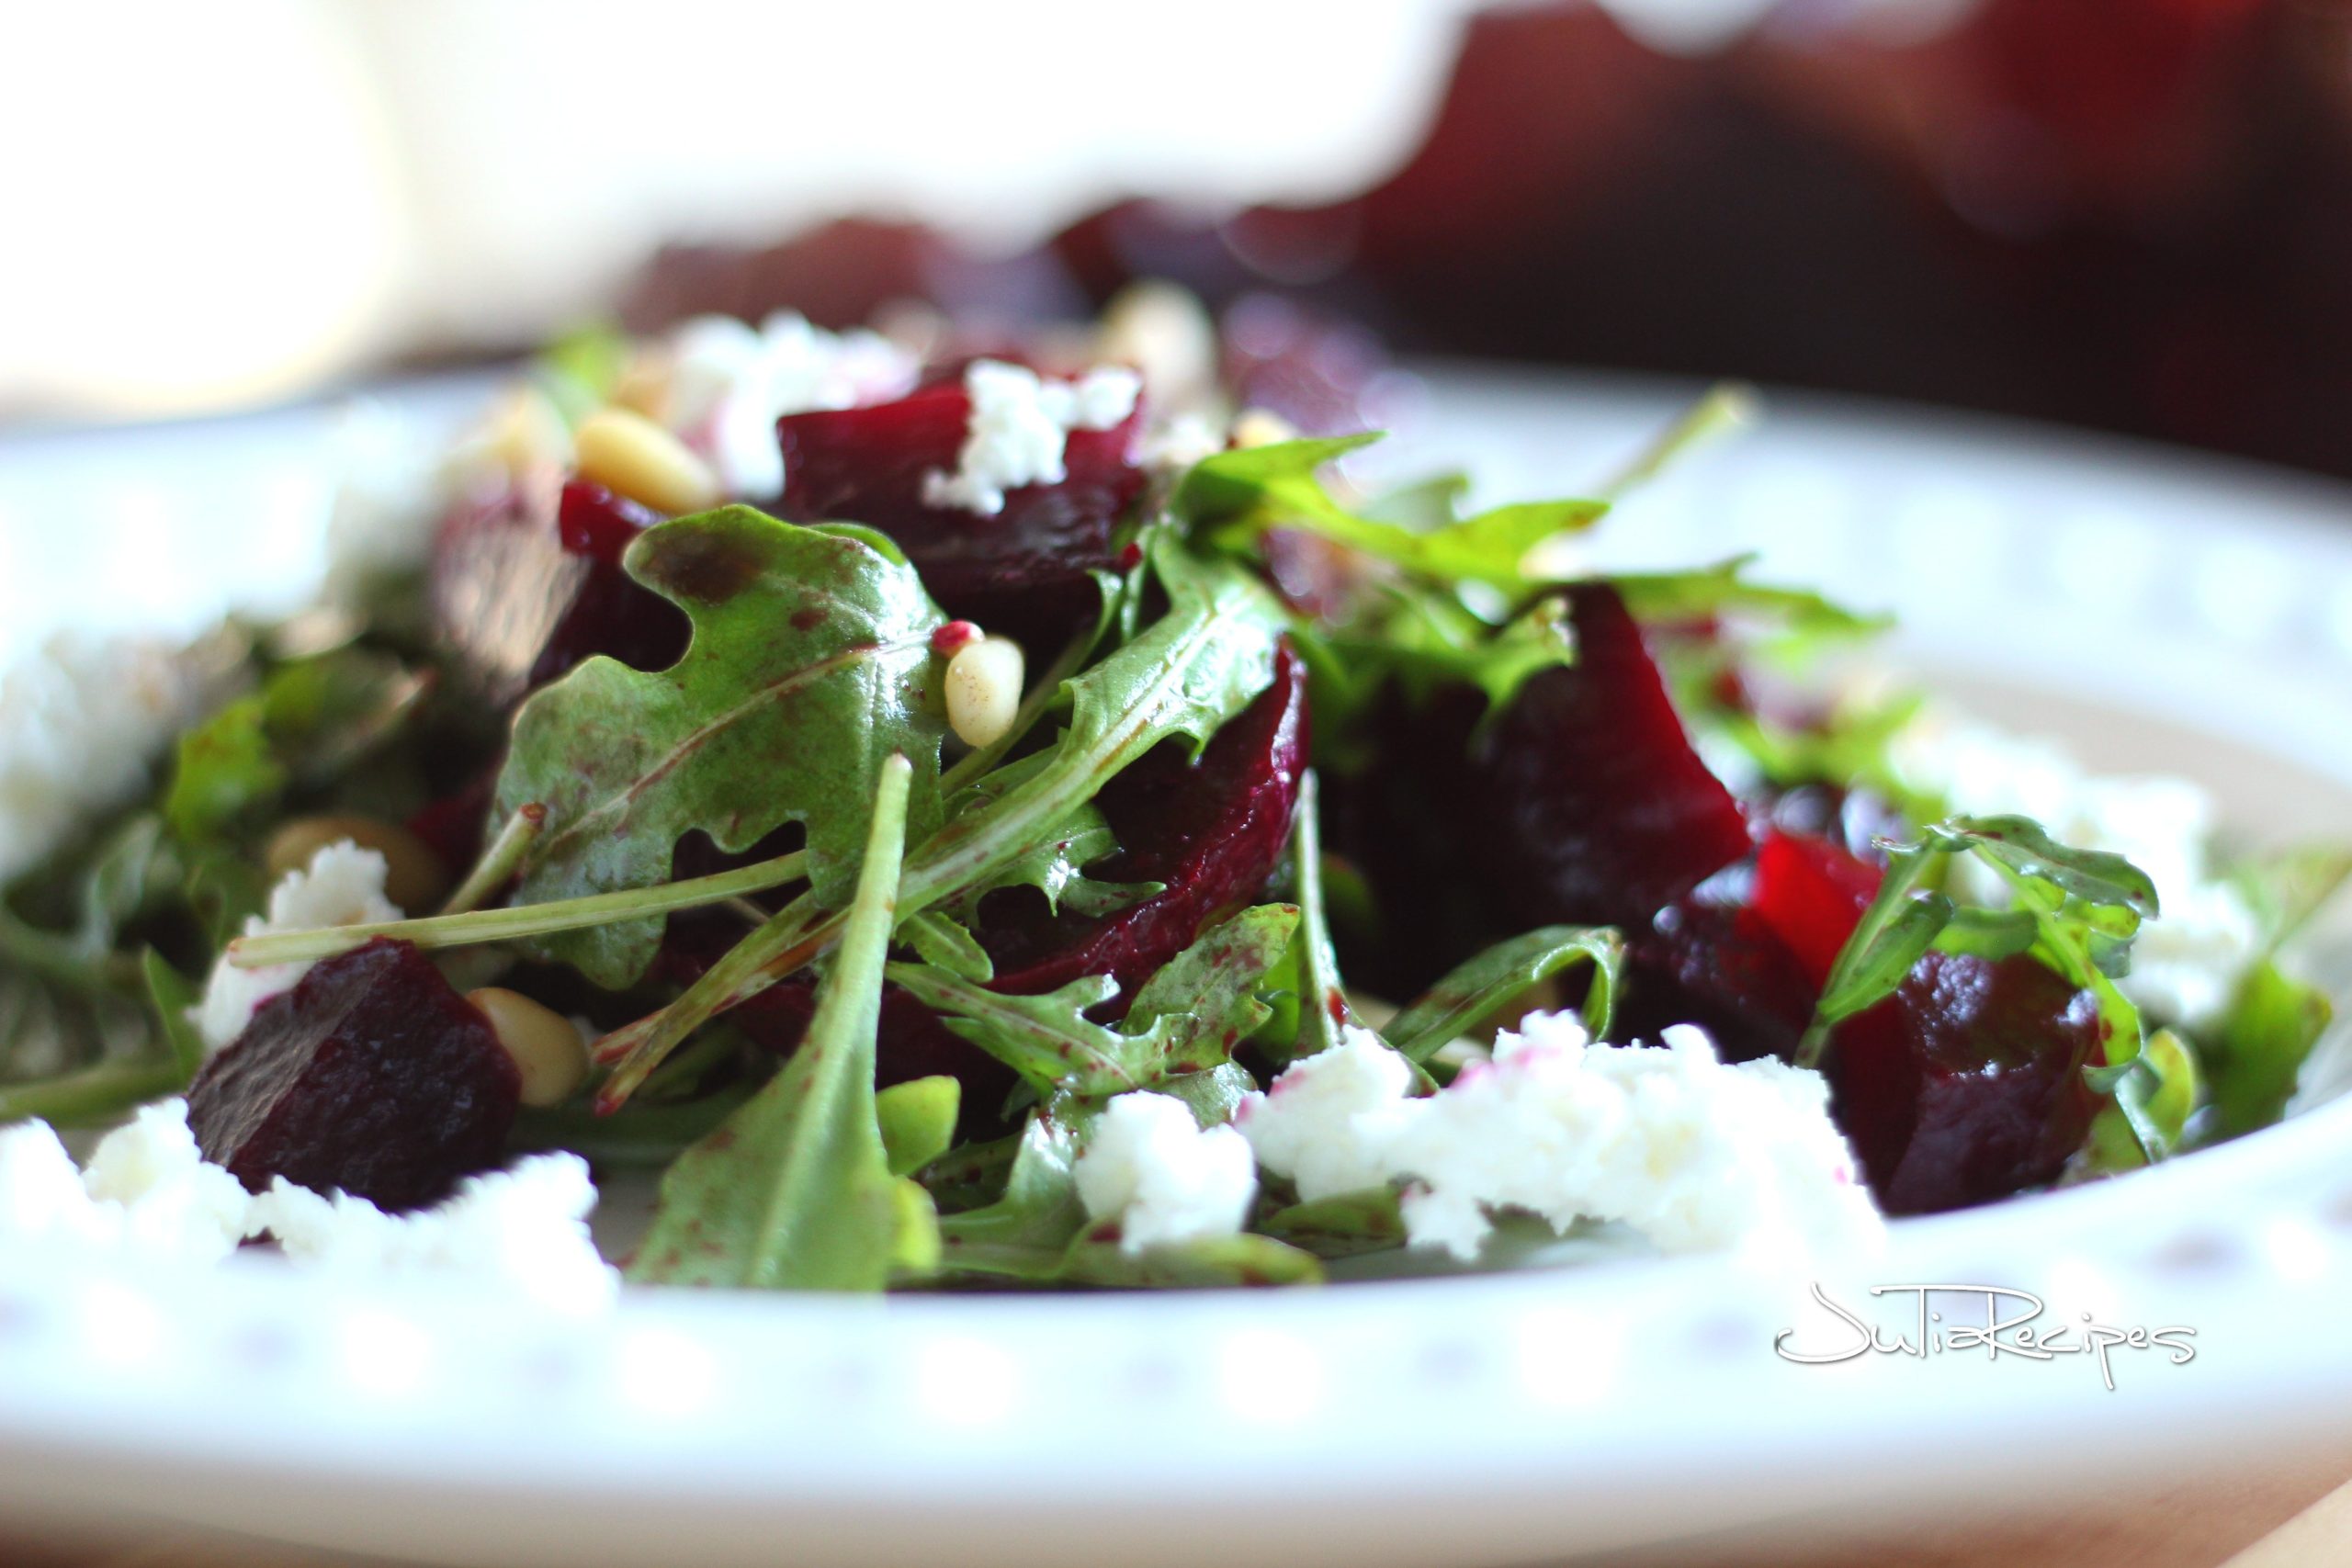 roasted beet salad with goat cheese